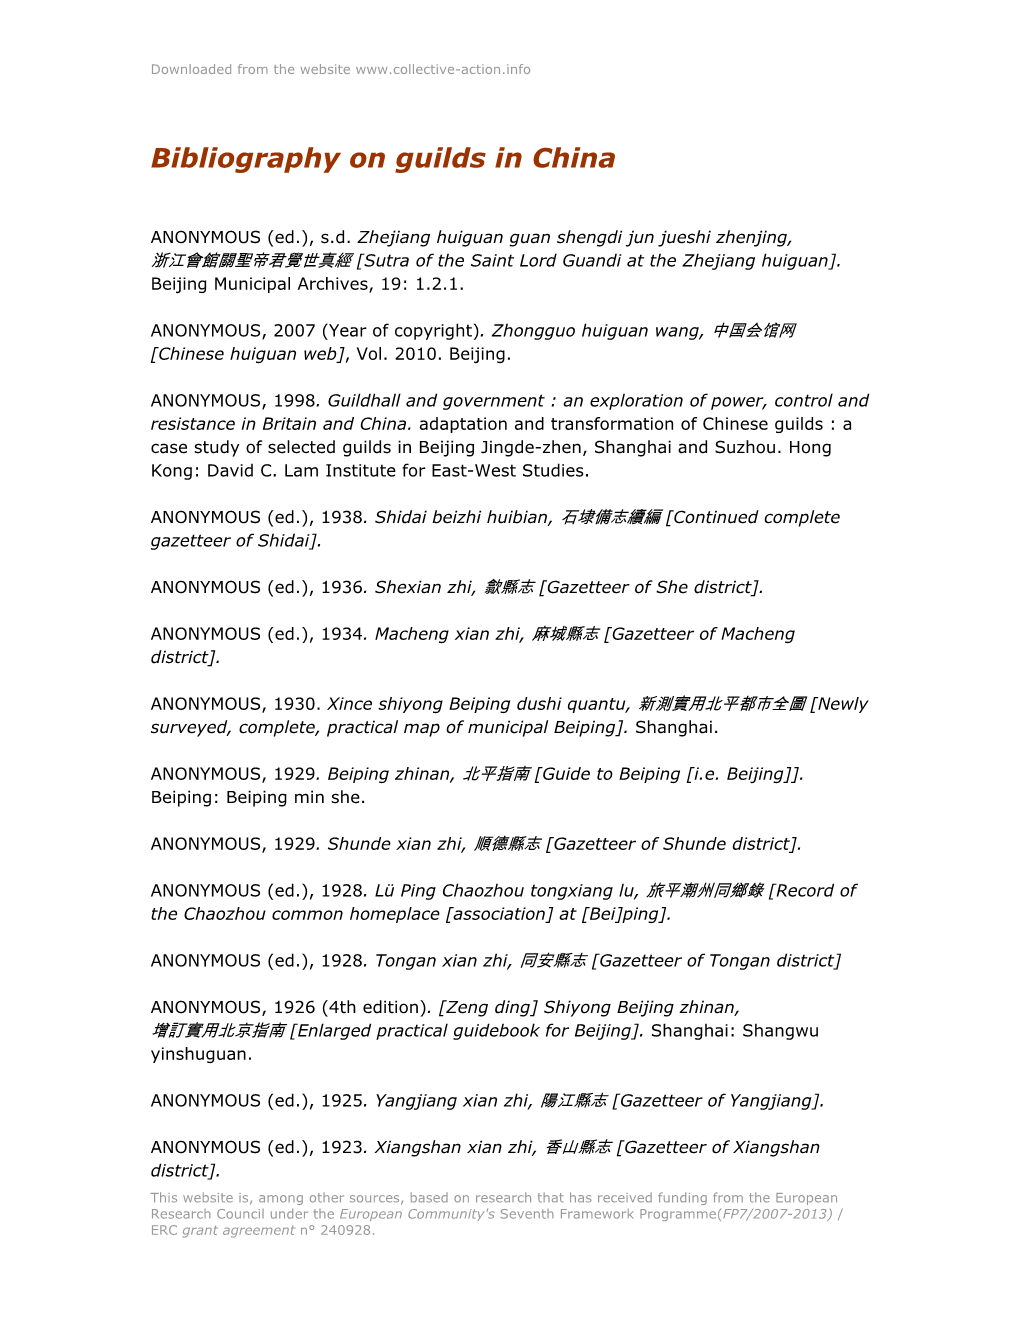 Bibliography on Guilds in China